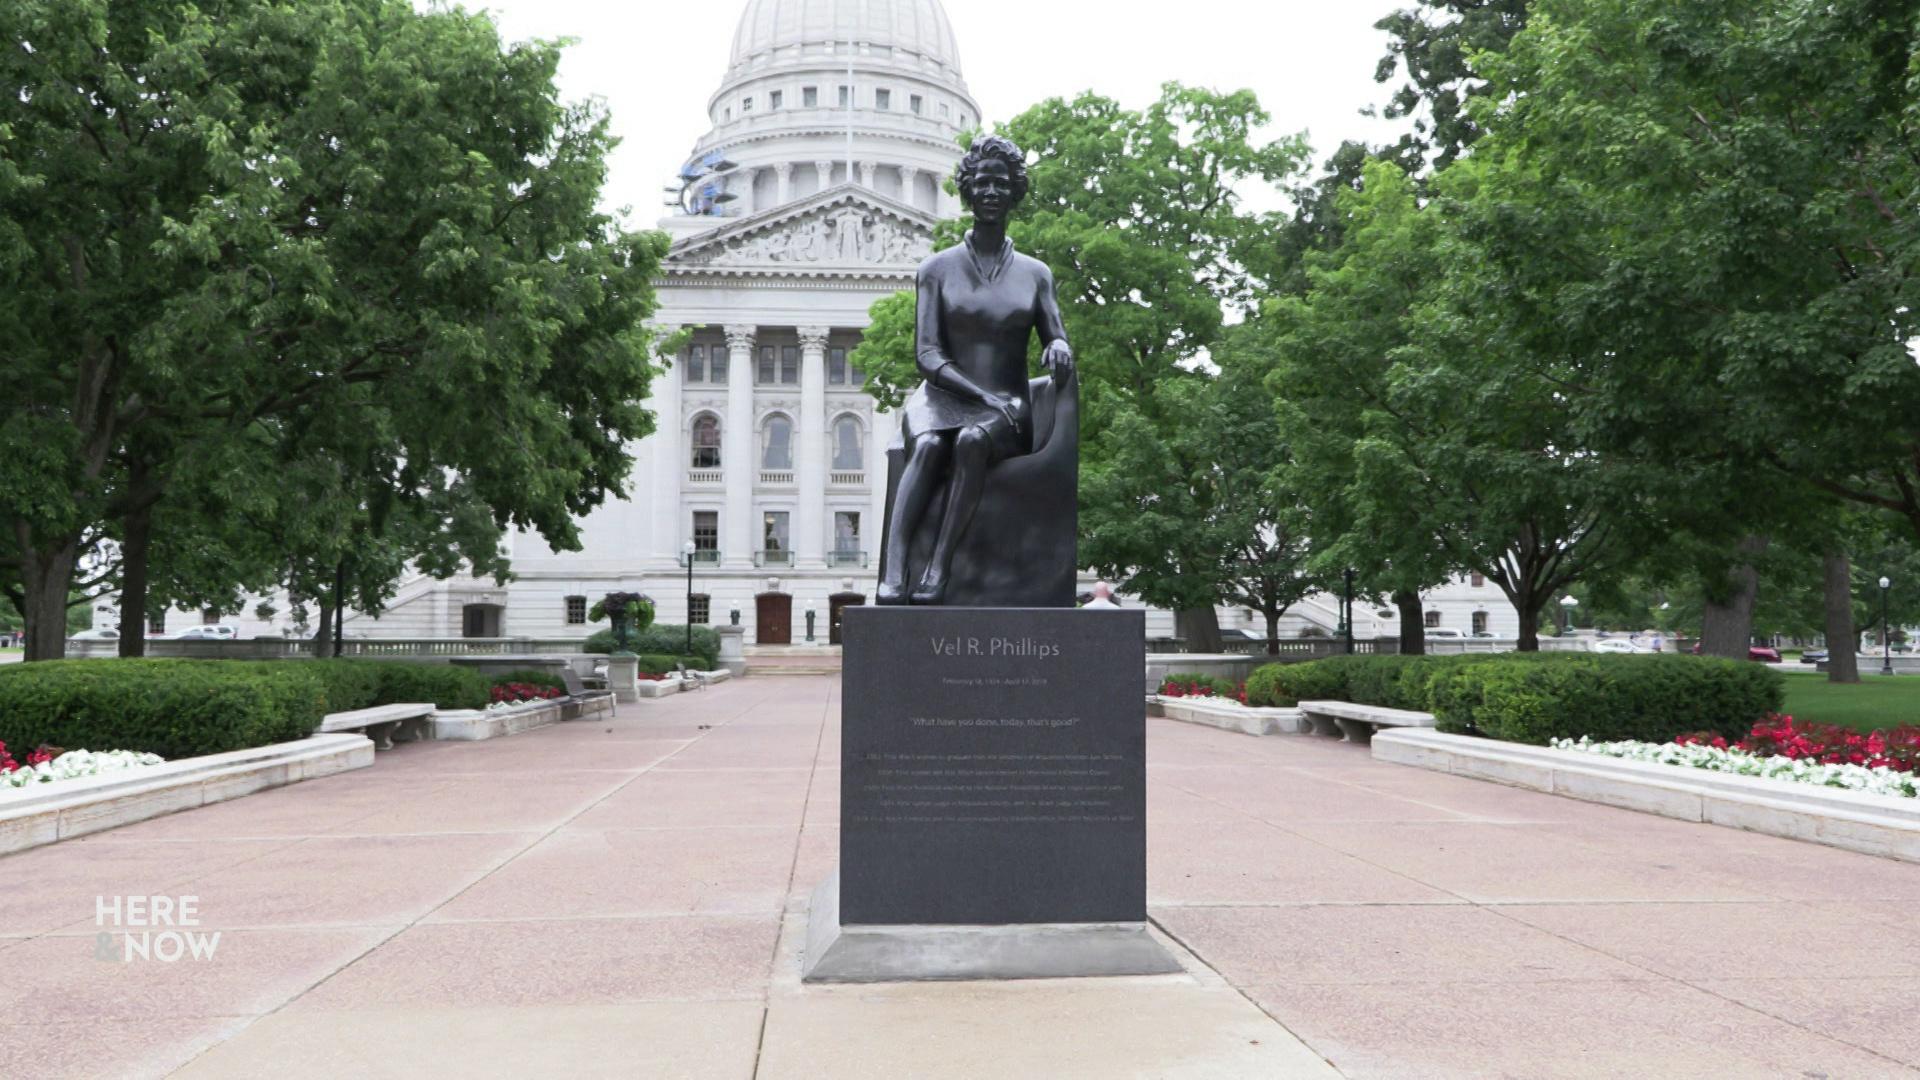 A still image shows a statue depicting Vel Phillips on cement in front of the Wisconsin State Capitol with trees and flowerbeds in the background.